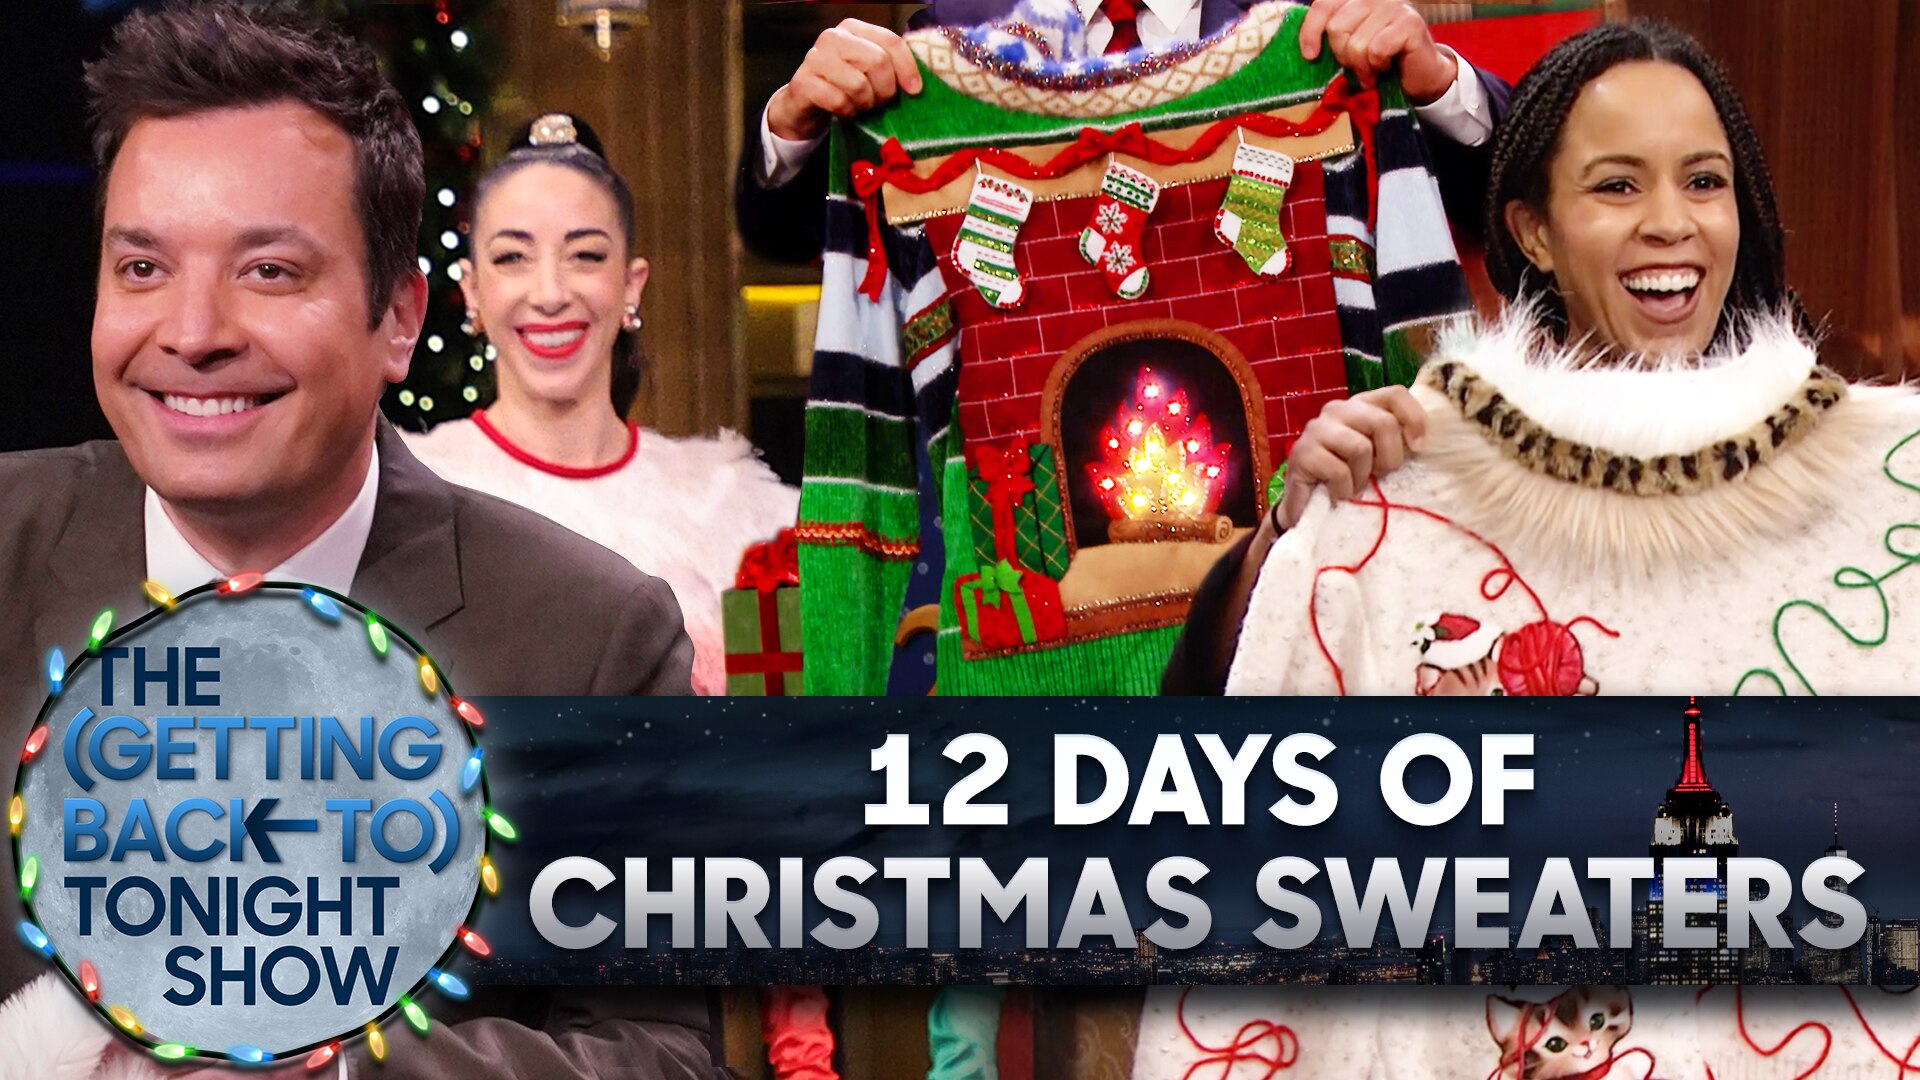 Watch The Tonight Show Starring Jimmy Fallon Web Exclusive 12 Days of